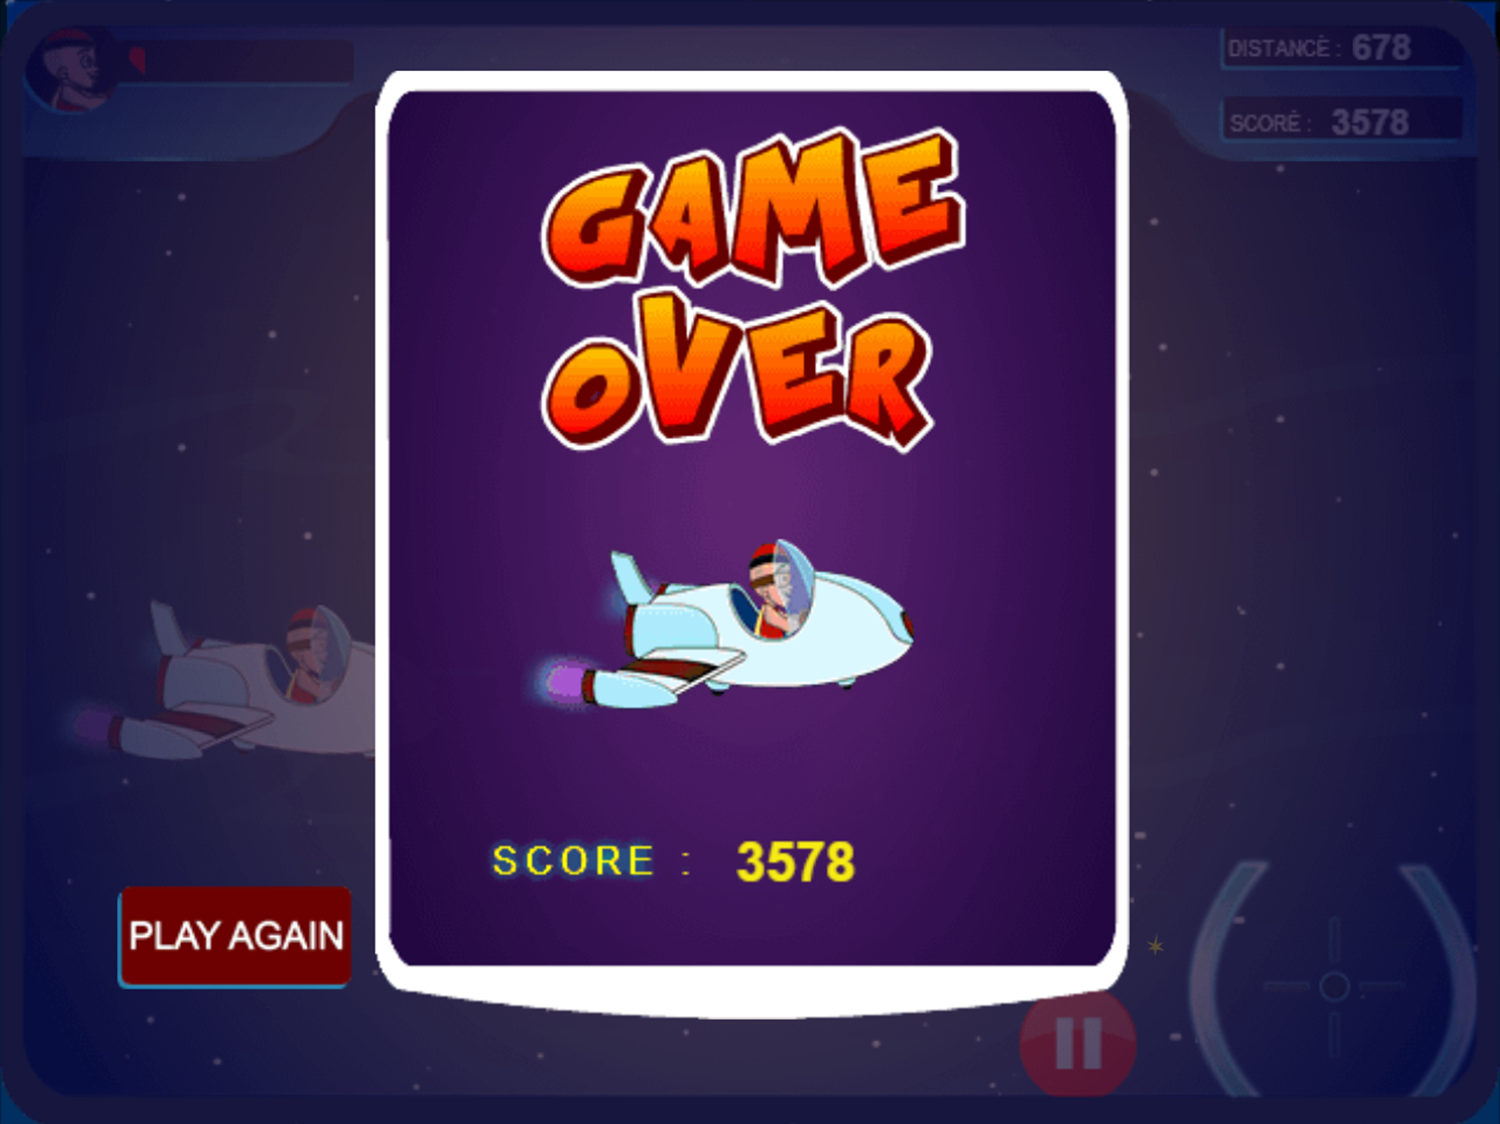 Mighty Raju and His Space Adventure Game Over Screenshot.